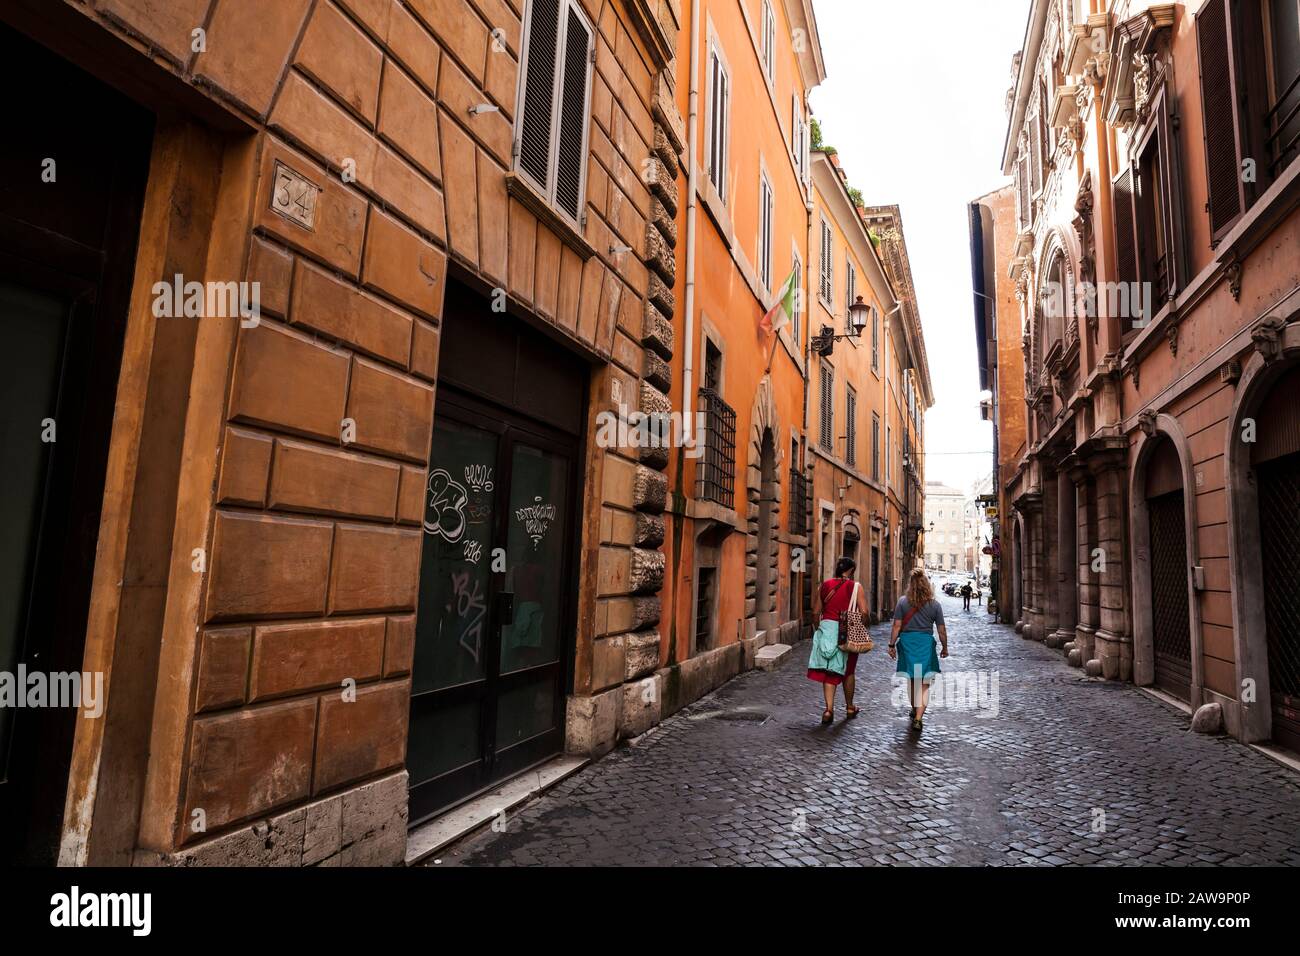 A woman walking with another woman in central Rome on a walking tour of the sites. Rome, Italy. Stock Photo